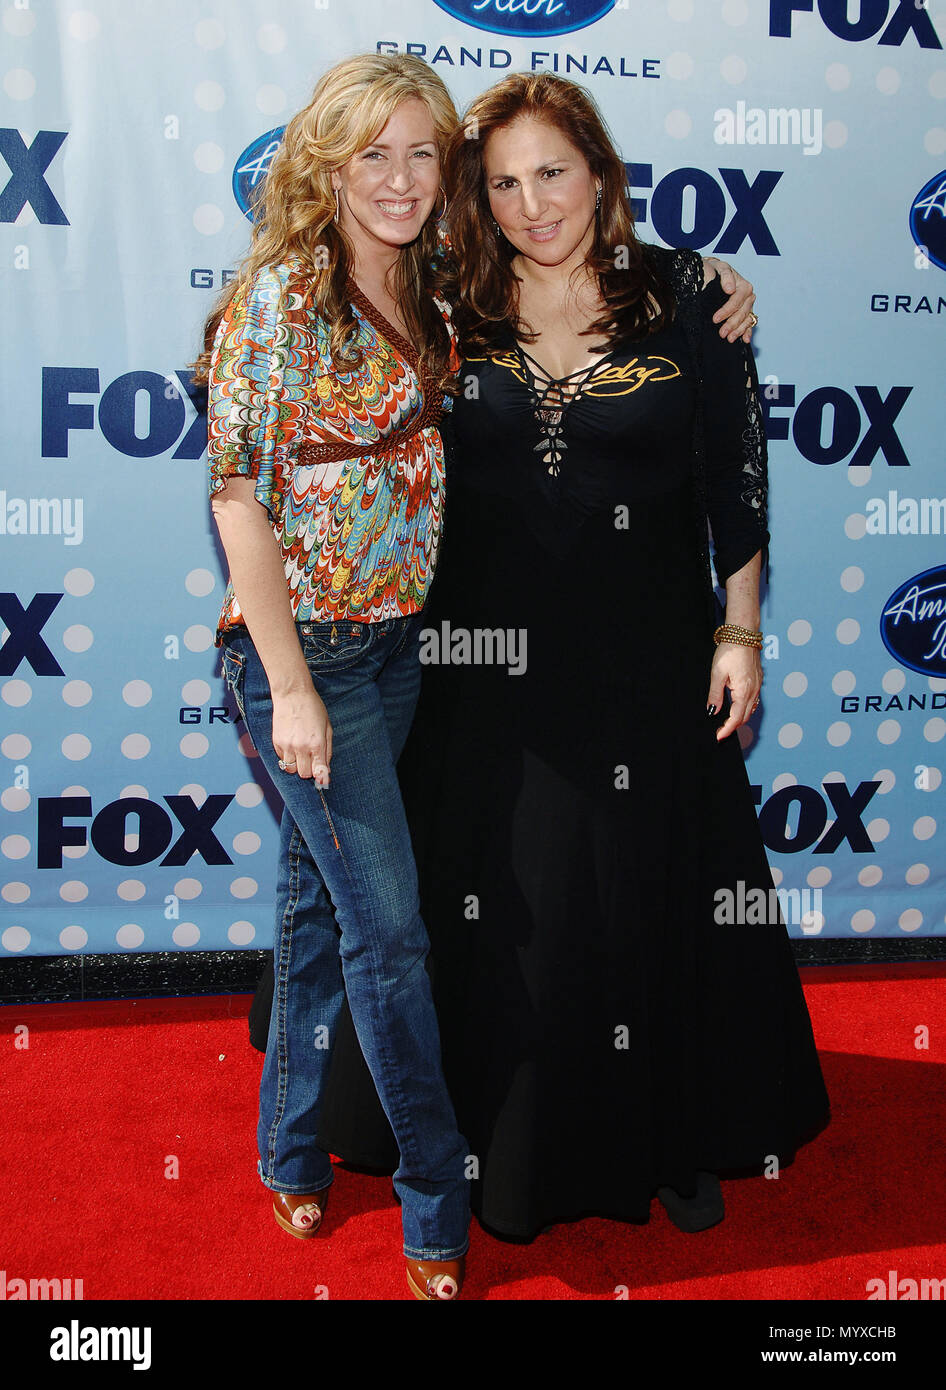 Joely Fisher  and Kathy Najimy arriving at the AMERICAN IDOL Final at the Kodak Theatre in Los Angeles.  eye contact full lenght smile FisherJoely NajimyKathy 25  Event in Hollywood Life - California, Red Carpet Event, USA, Film Industry, Celebrities, Photography, Bestof, Arts Culture and Entertainment, Celebrities fashion, Best of, Hollywood Life, Event in Hollywood Life - California, Red Carpet and backstage, Music celebrities, Topix, Couple, family ( husband and wife ) and kids- Children, brothers and sisters inquiry tsuni@Gamma-USA.com, Credit Tsuni / USA, 2006 to 2009 Stock Photo